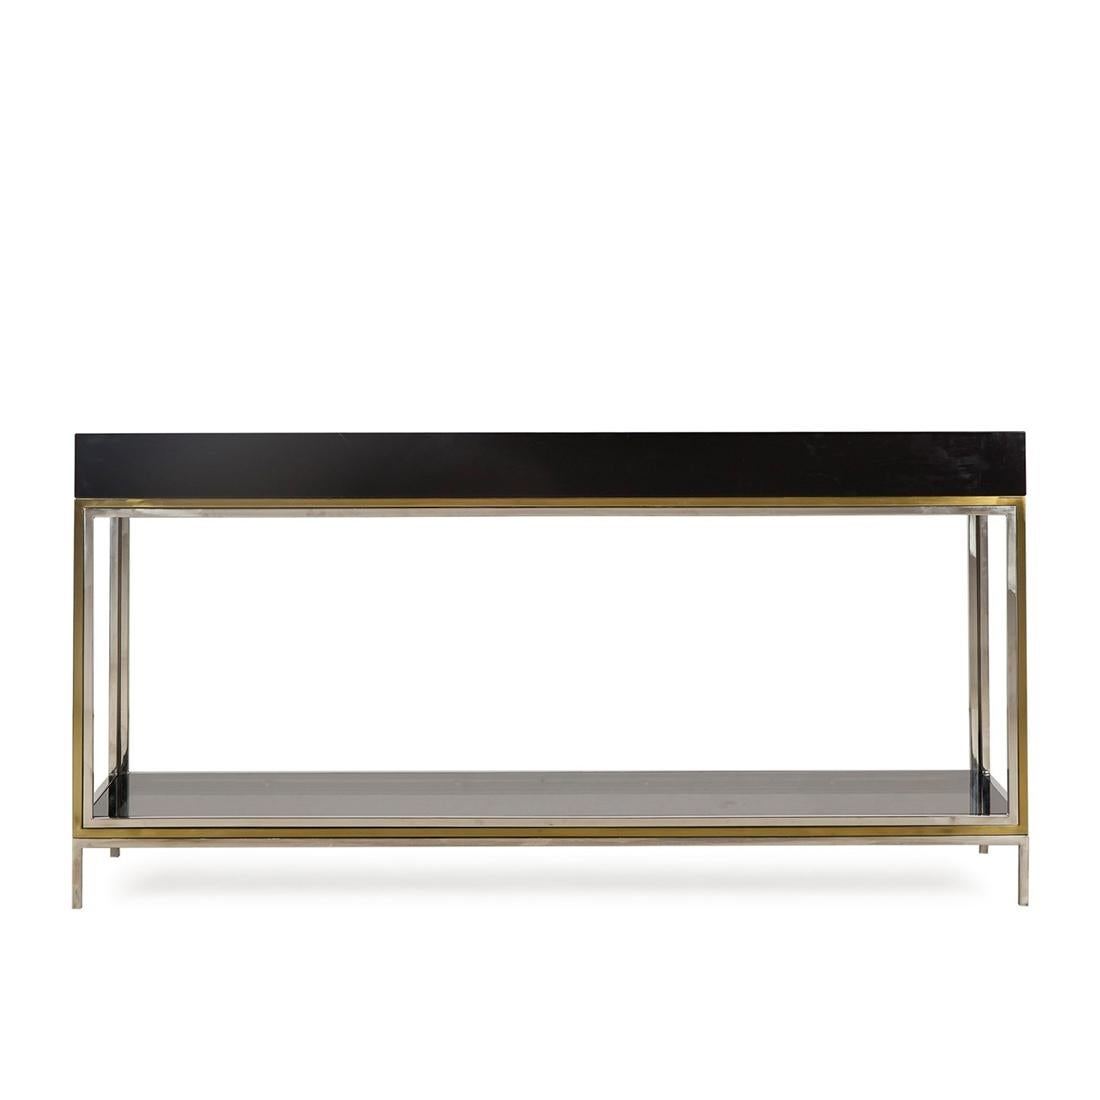 Console table lacquered black with structure
in MDF black lacquered finish, with smoked glass
top and with frame in stainless steel in brass satinated finish.